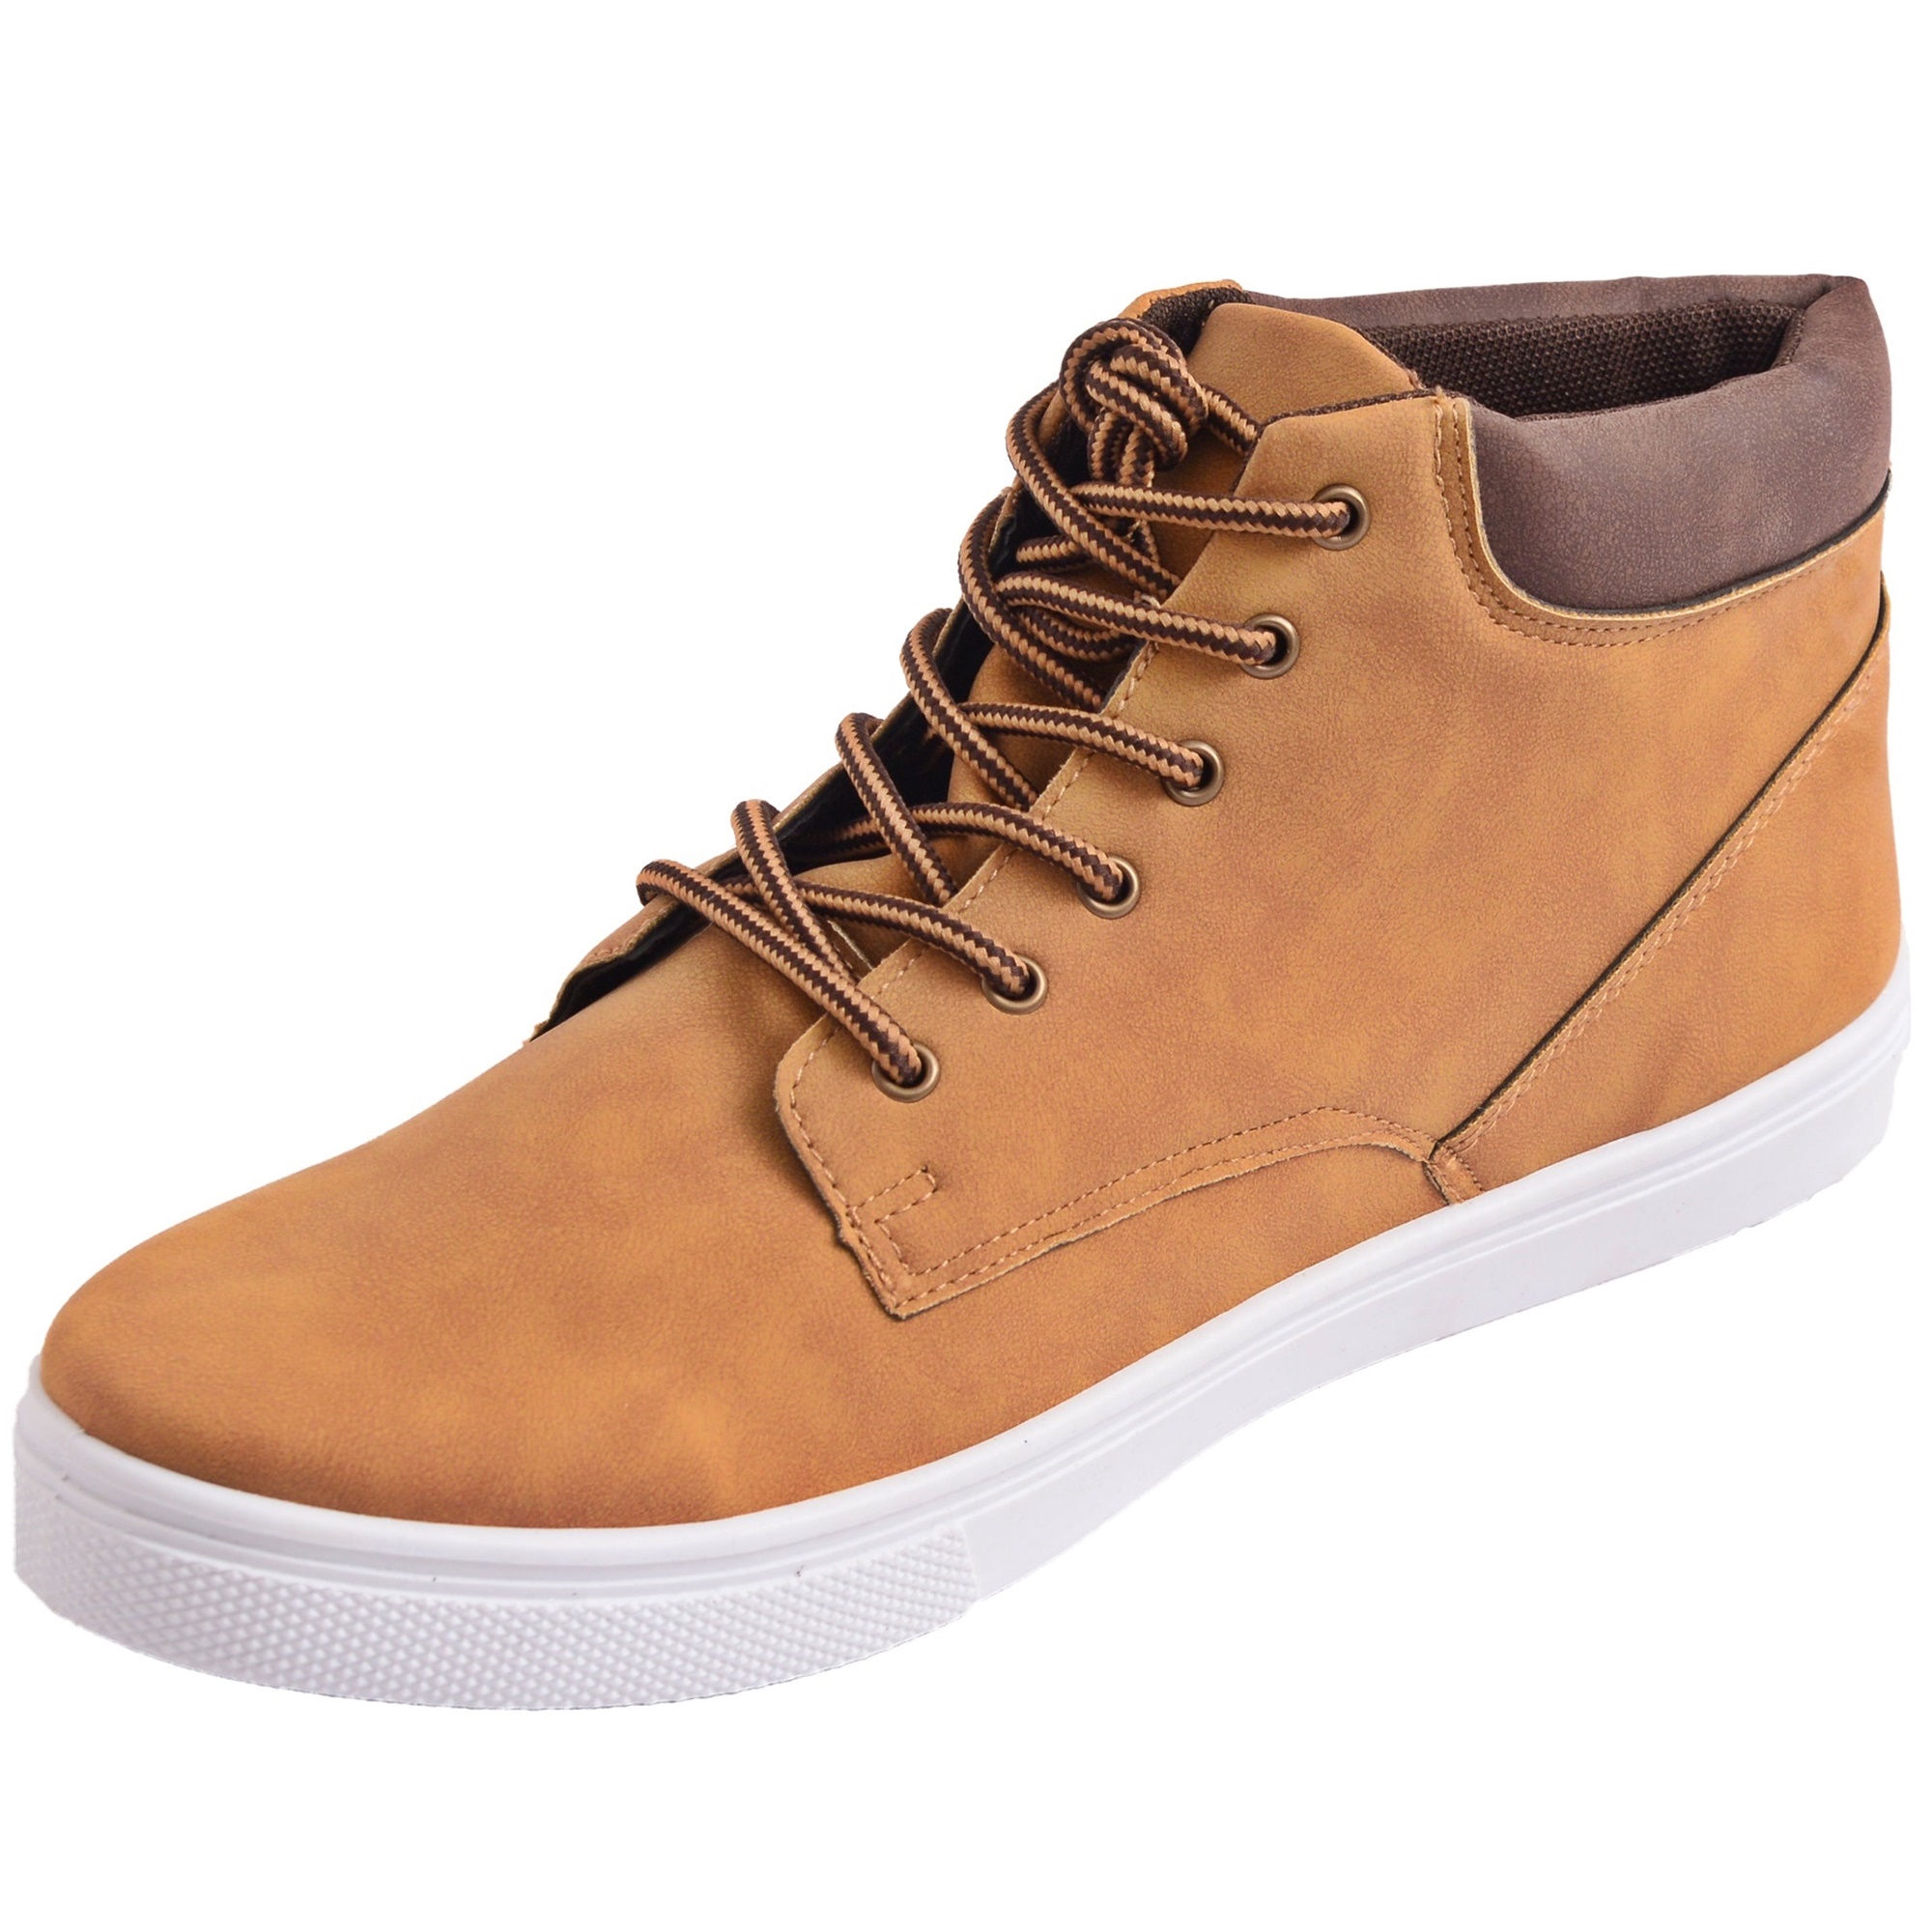 Alpine Swiss Keith Mens High Top Fashion Sneakers Lace up Boots - Alpine Swiss